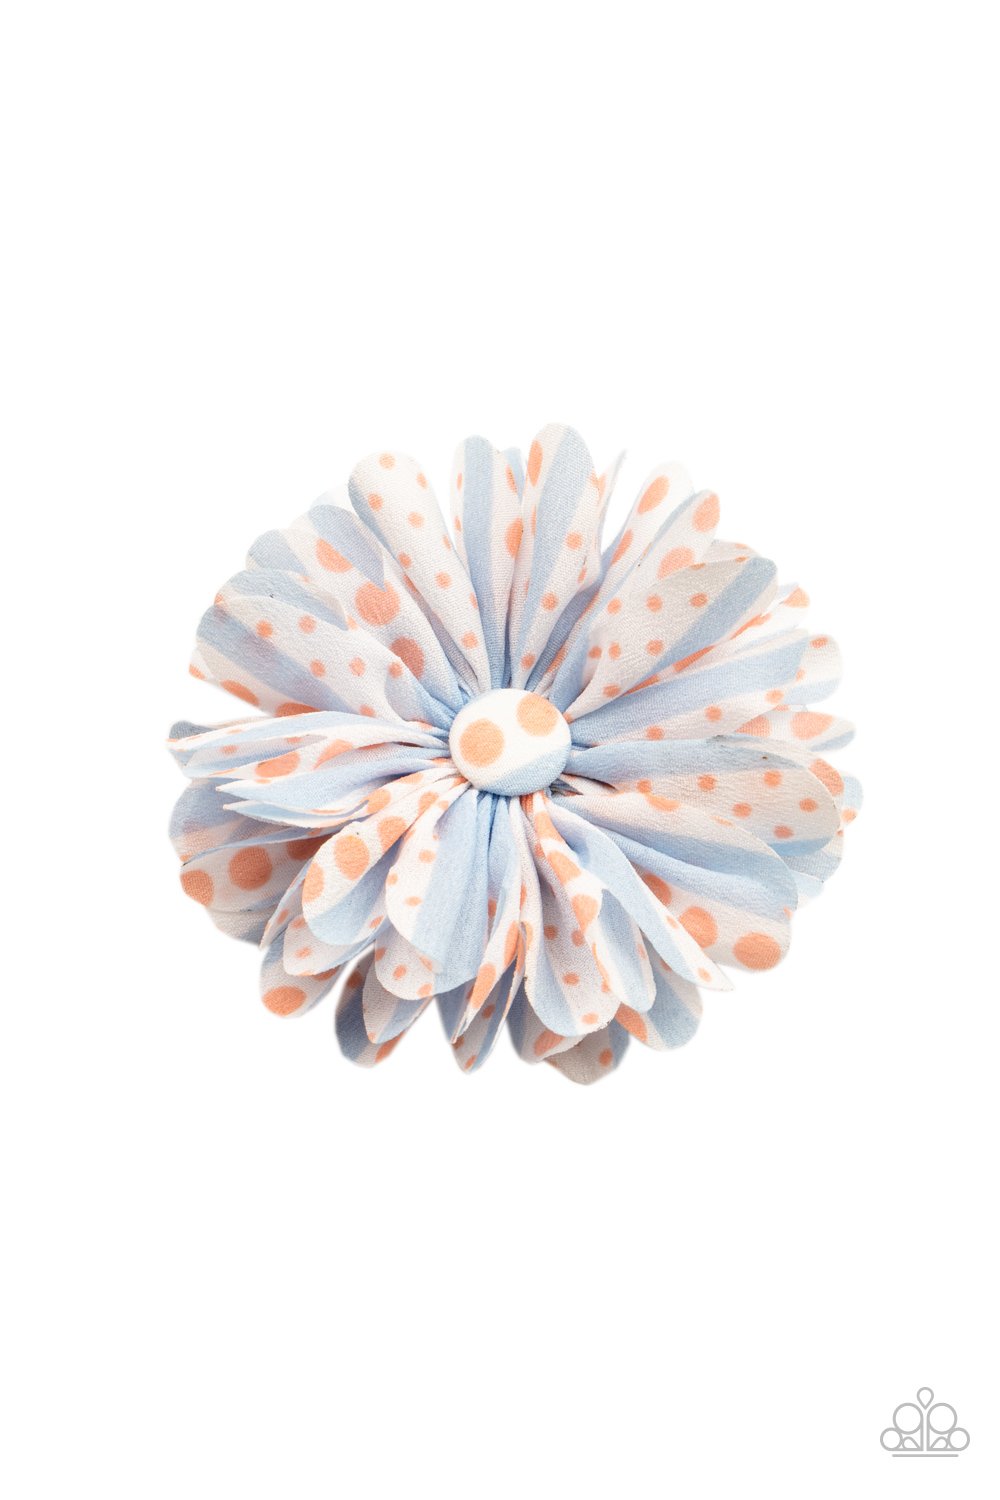 &lt;p&gt;Featuring Burnt Coral polka dots, Cerulean striped chiffon petals gather around a matching button top center for a whimsical look. Features a standard hair clip on the back.&lt;/p&gt;
&lt;p&gt;&lt;i&gt;Sold as one individual hair clip. &lt;/i&gt;&lt;/p&gt;